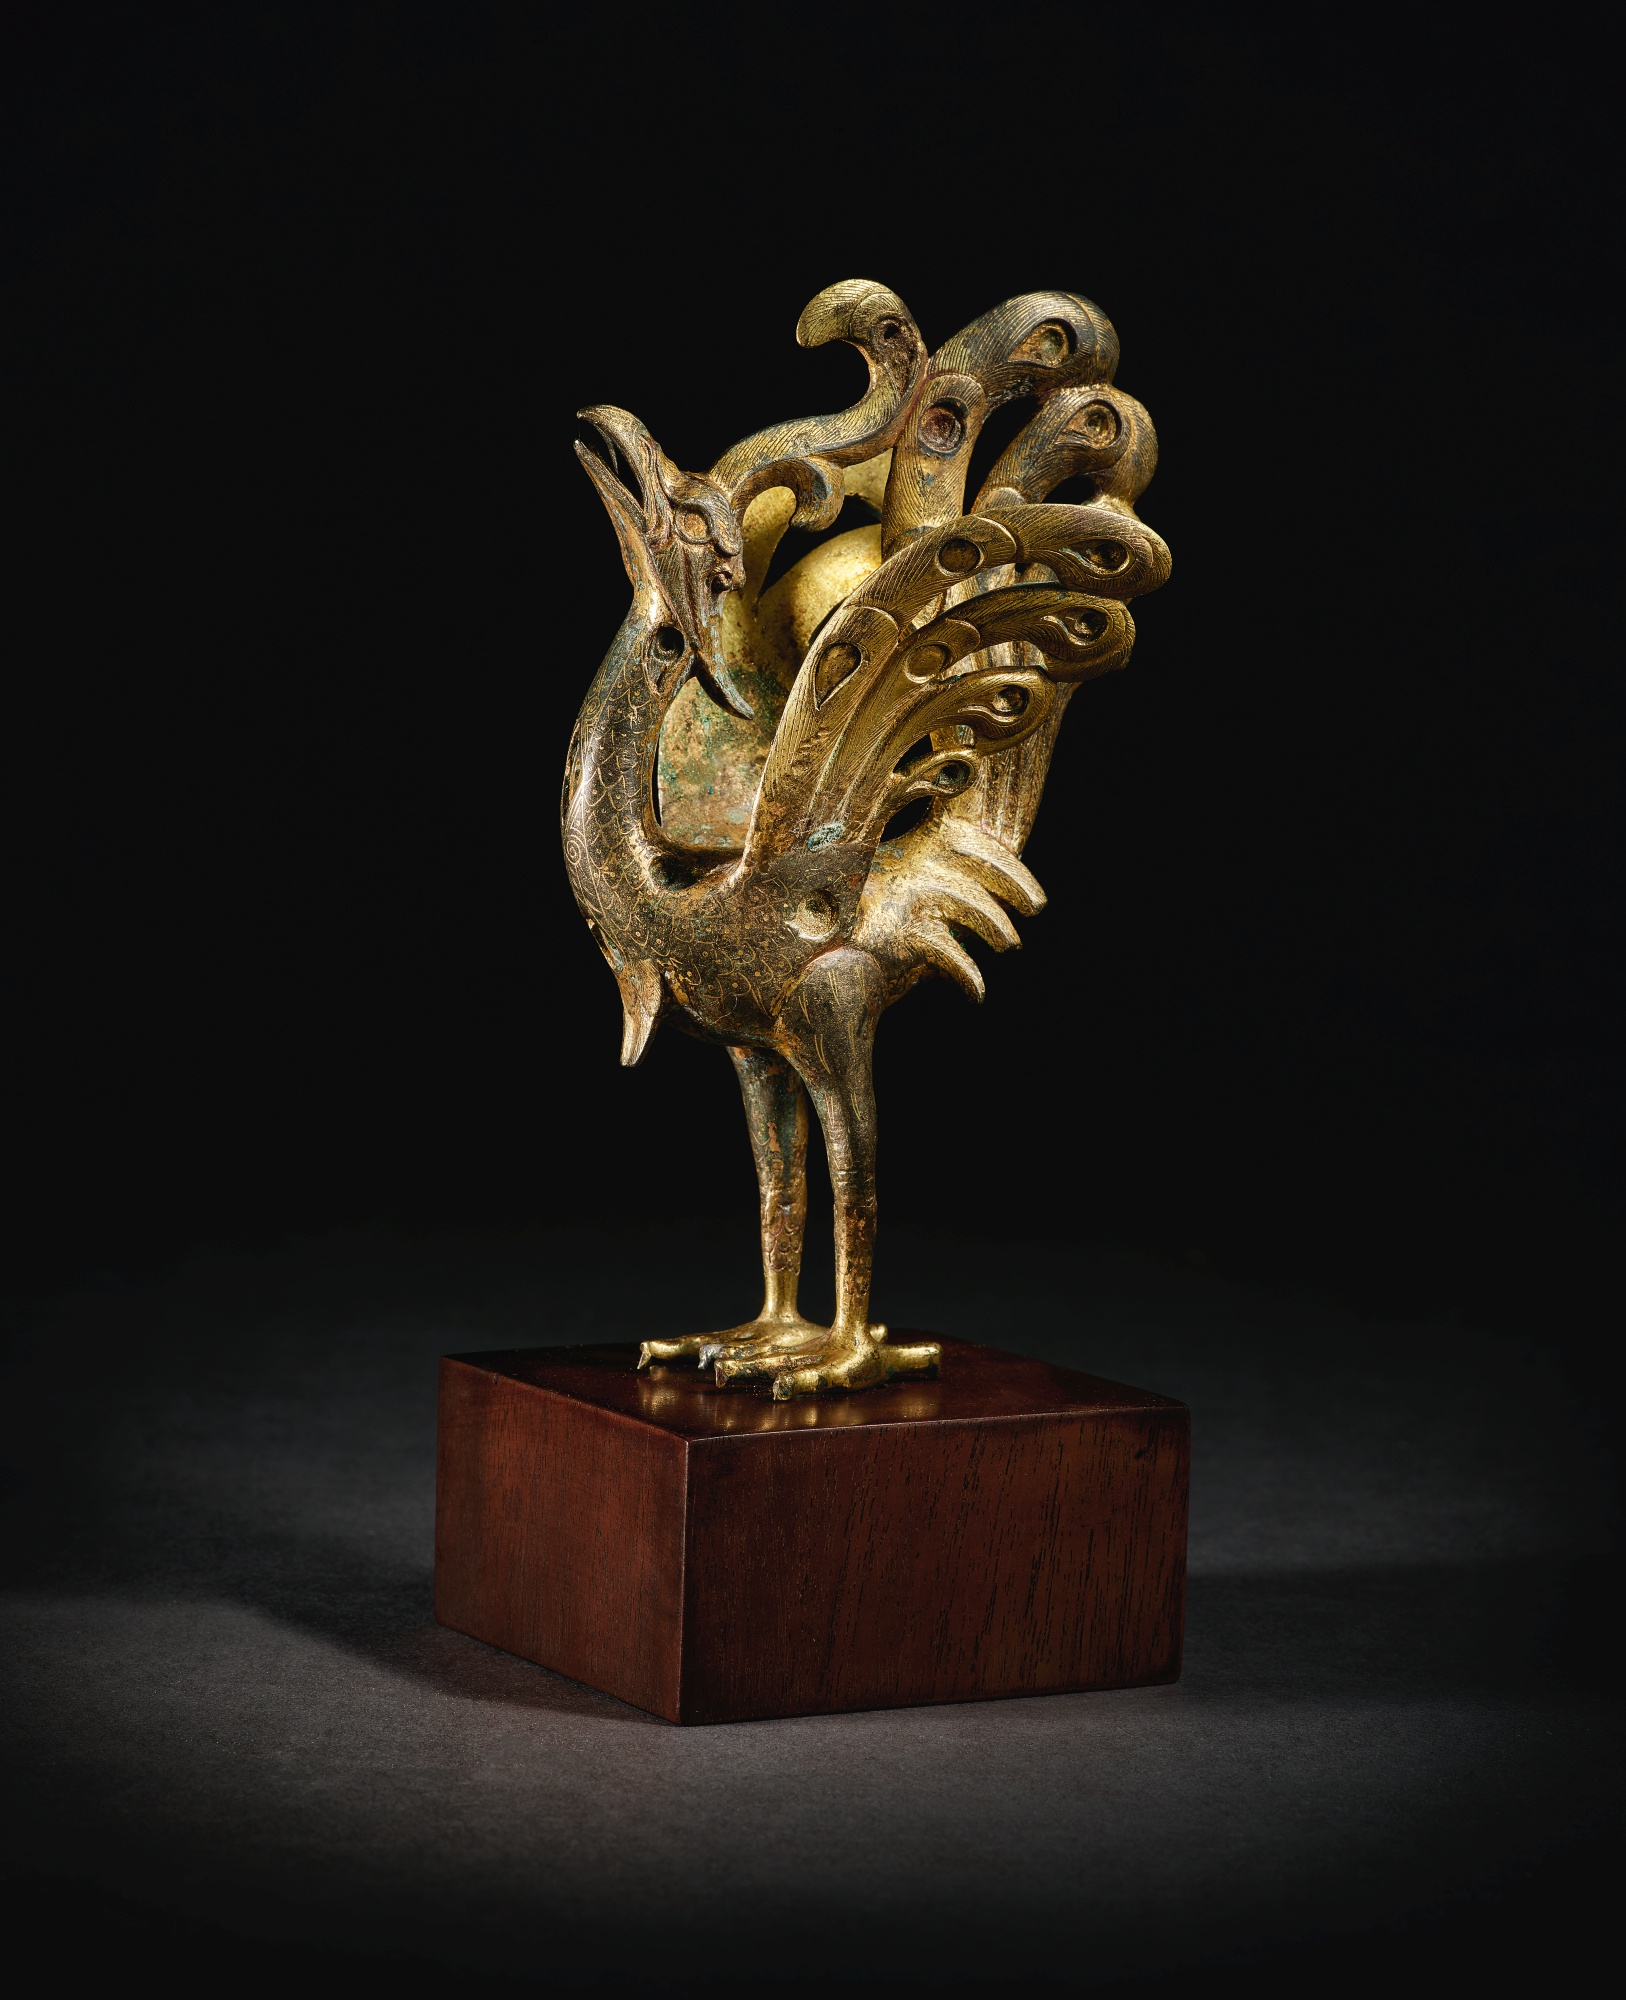 Lot 226. A splendid and rare gold and silver-inlaid parcel-gilt bronze figure of a peacock, Han dynasty (206 BC-AD 220). Height 6 1/8  in., 15.5 cm. Estimate 200,000 — 300,000 USD. Courtesy Sotheby's.